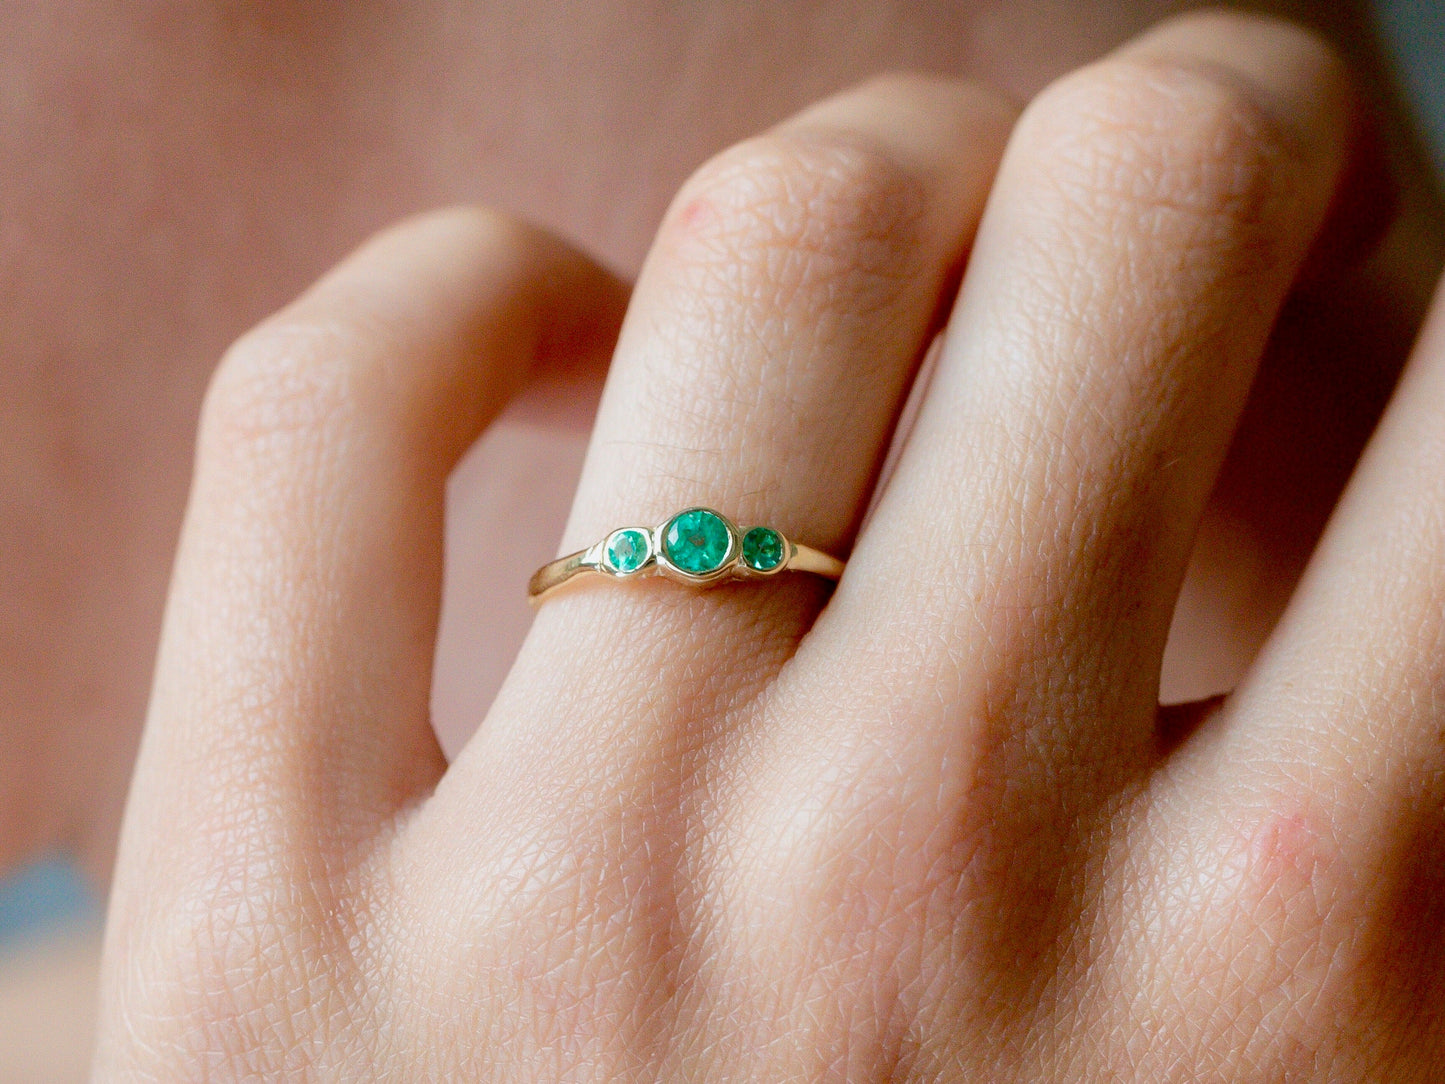 The Emerald Queen Ring